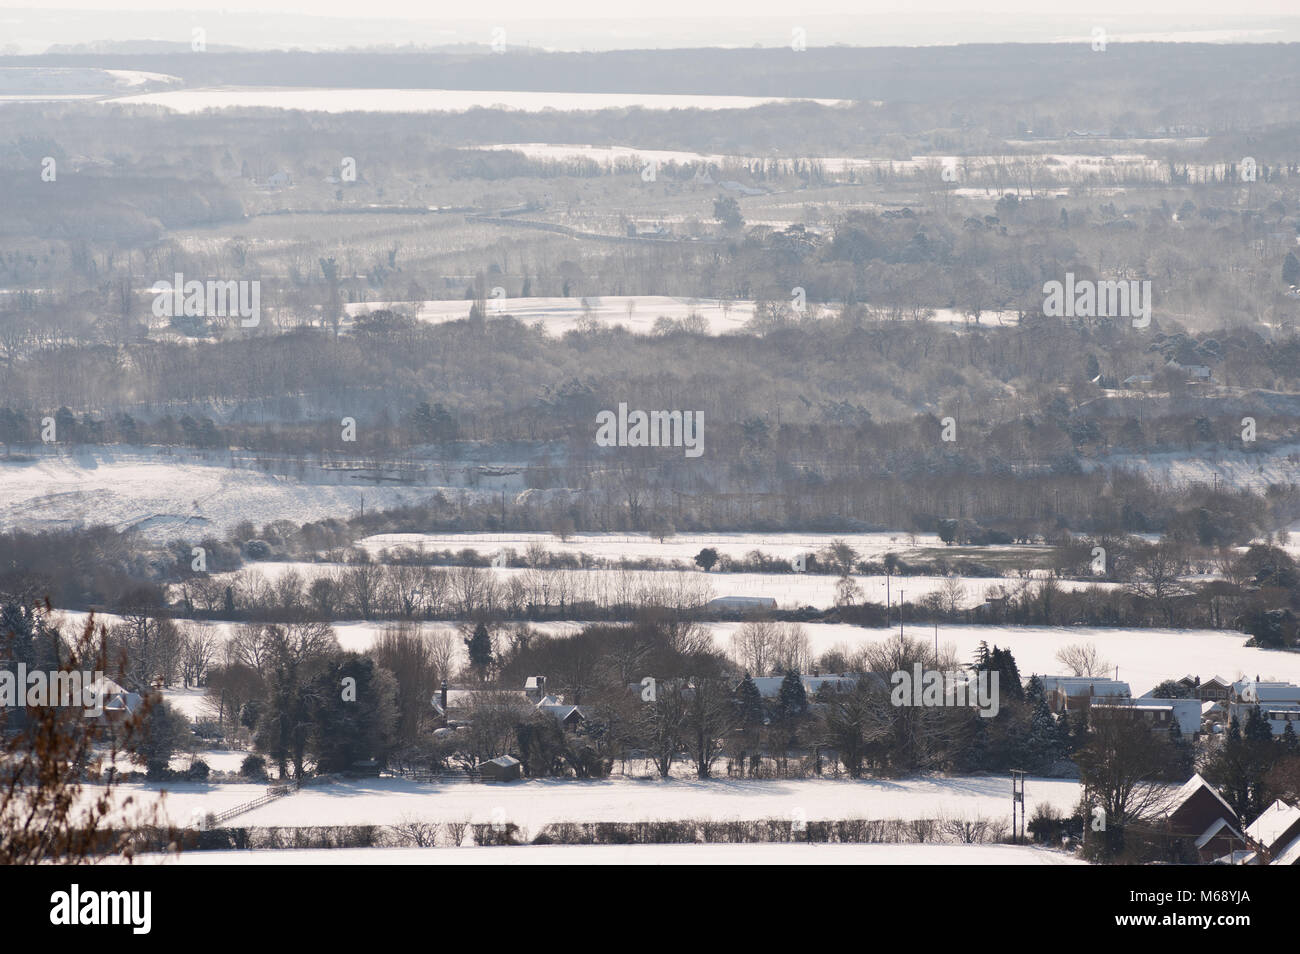 The Beast from the East coating snow south facing view over Trottiscliffe, Hadlow, Bedgebury, Weald, Wrotham, Paddock Wood, Sissinghurst, Wateringbury Stock Photo